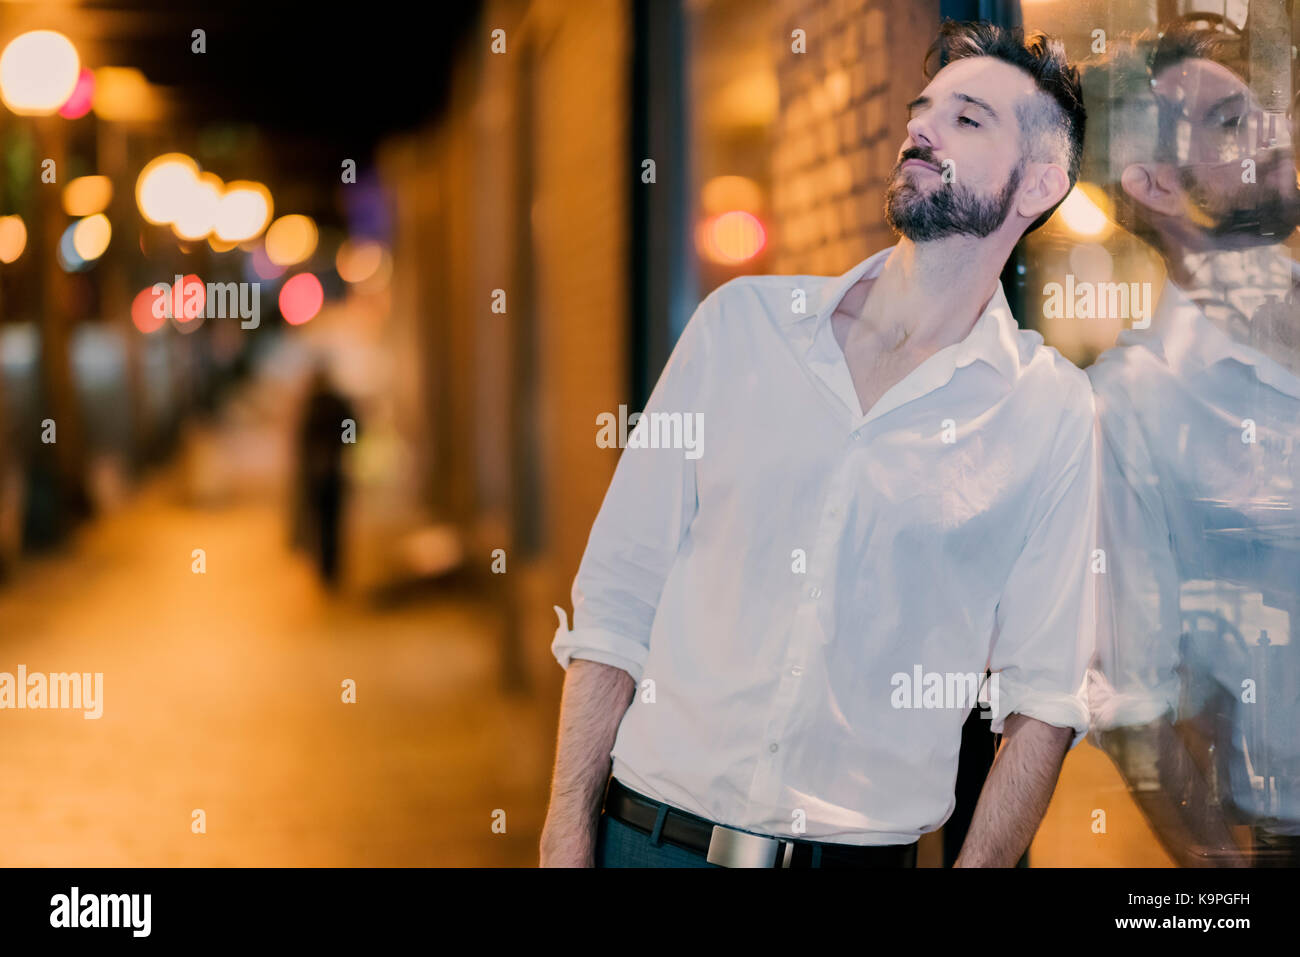 Handsome caucasian male professional photographed on the street at night leaning against a shop window looking down. Stock Photo